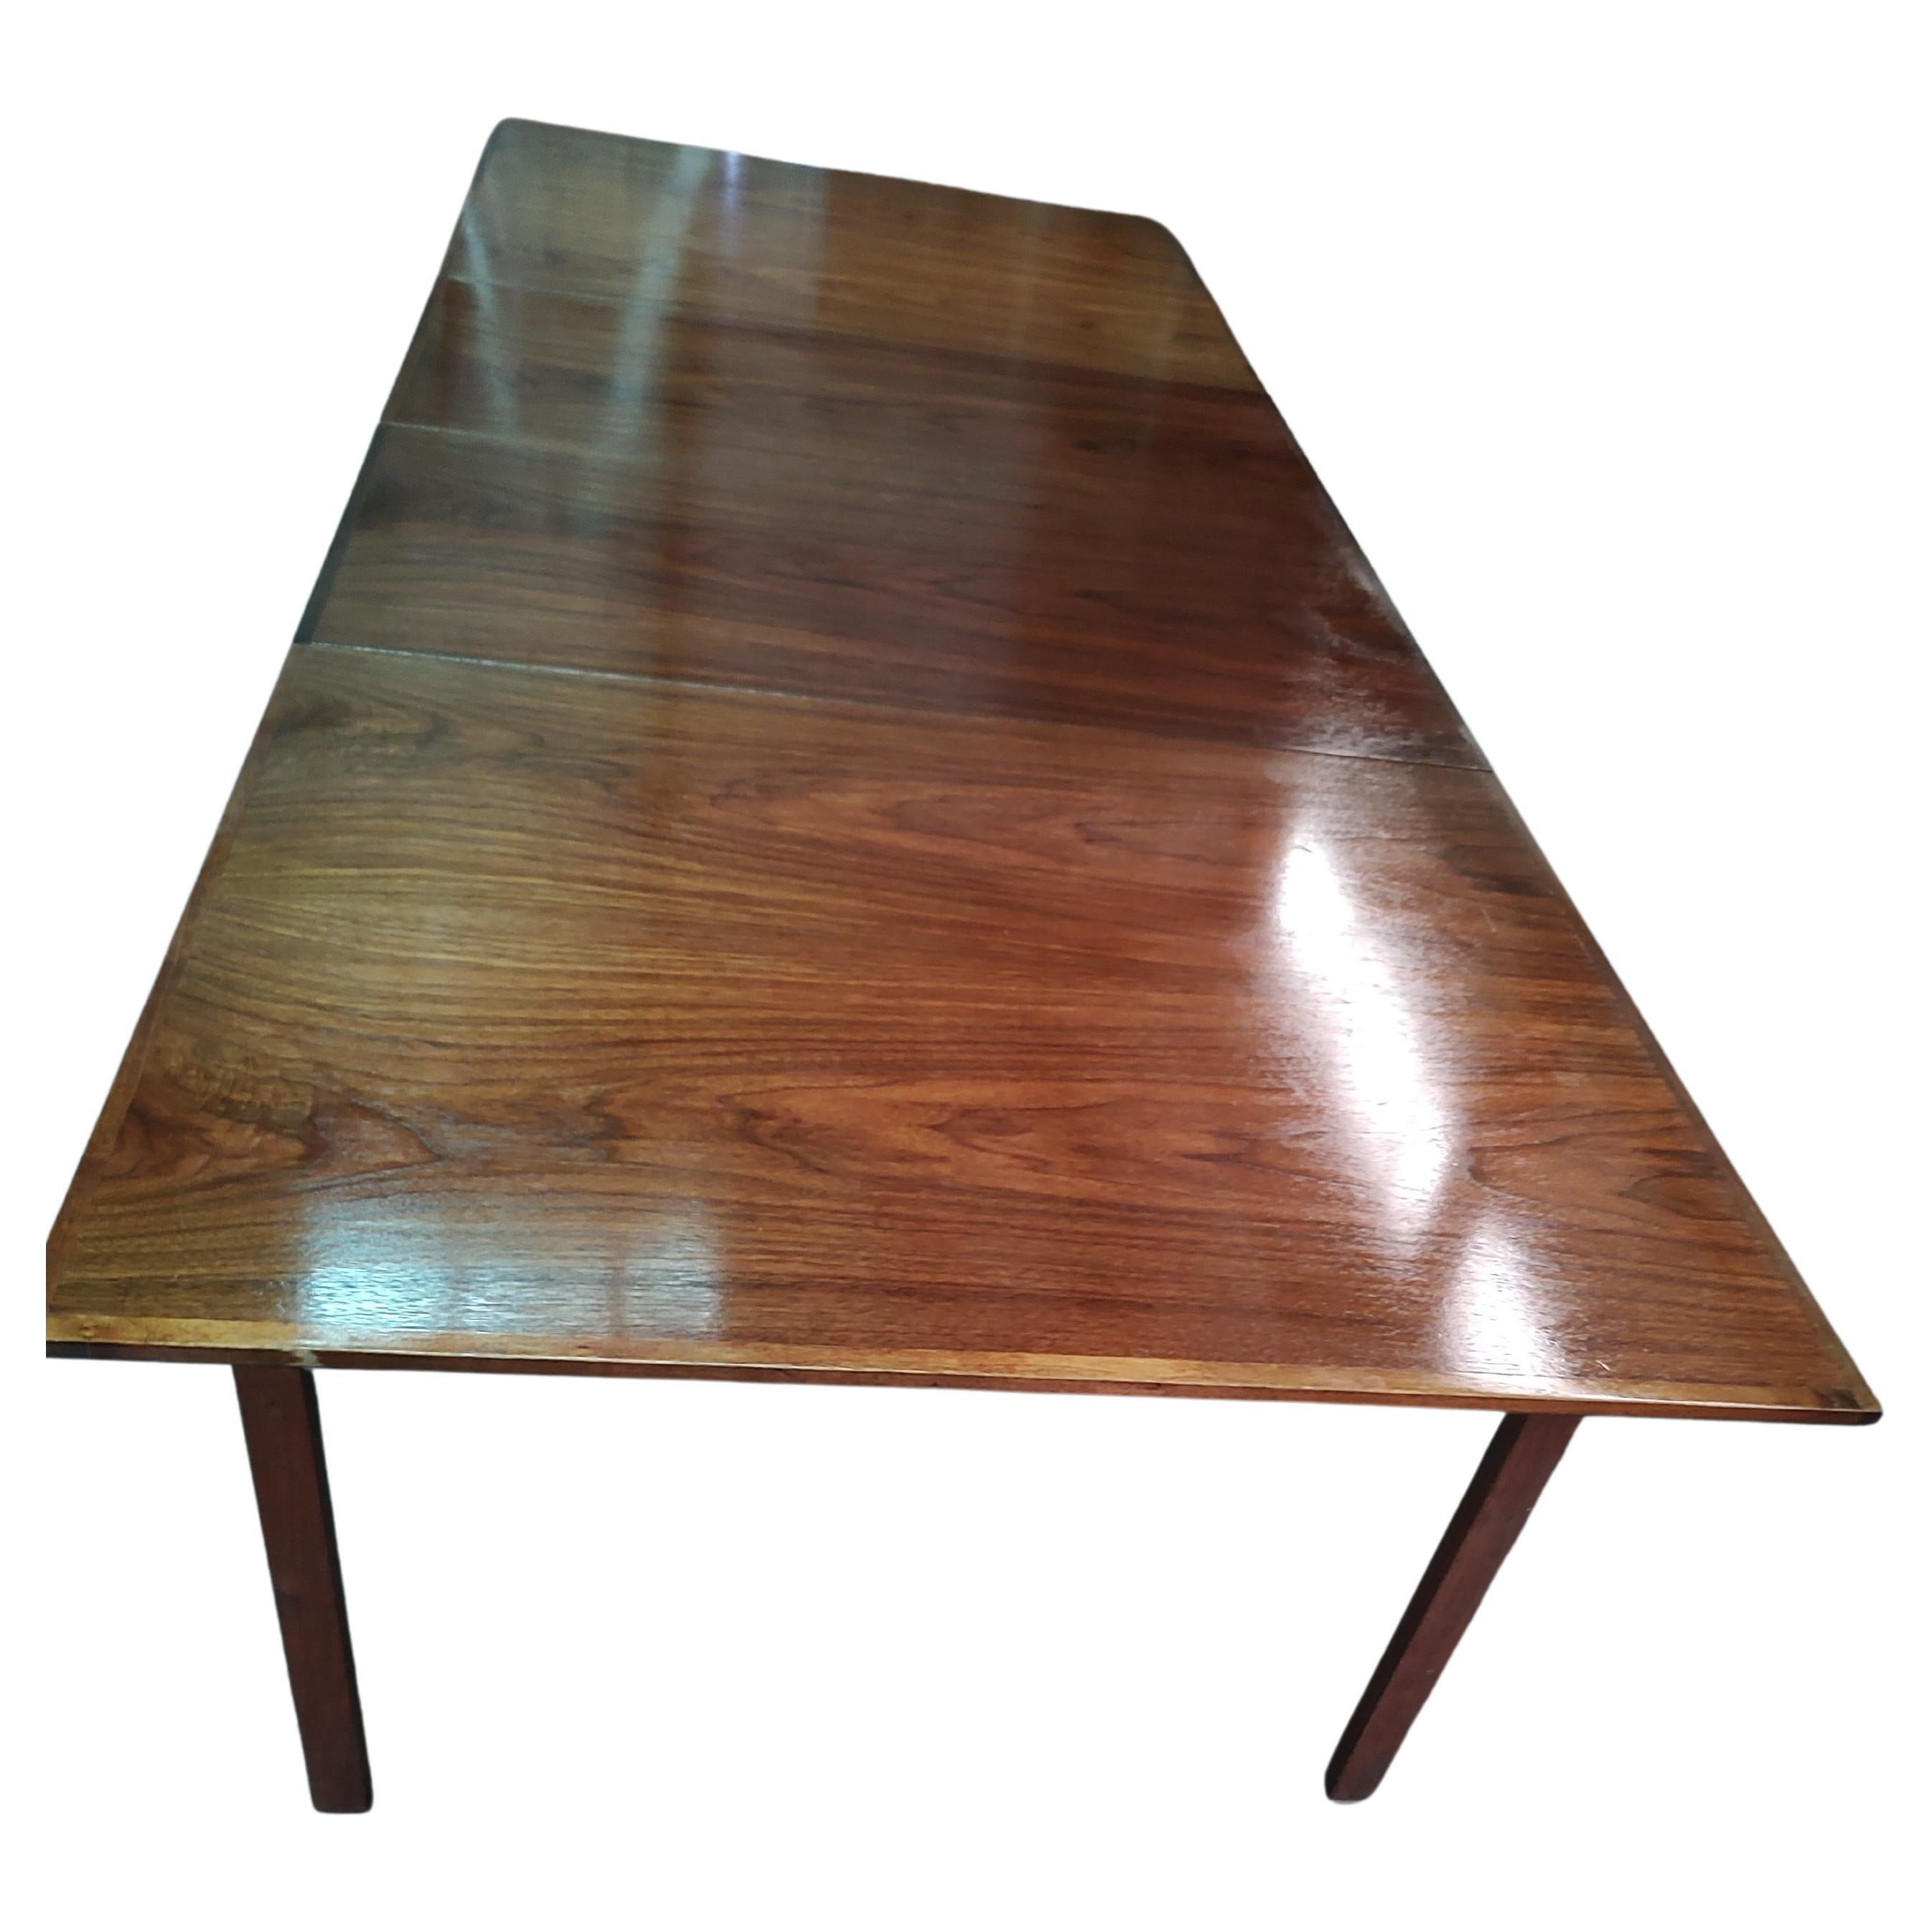 Simple and elegant black walnut dining table attributed to the Founders Furniture Company. In excellent vintage condition with minimal wear, it was well taken care of. Two large leaves 20 inch each. Table without the the leaves is 41.5 x 64. With